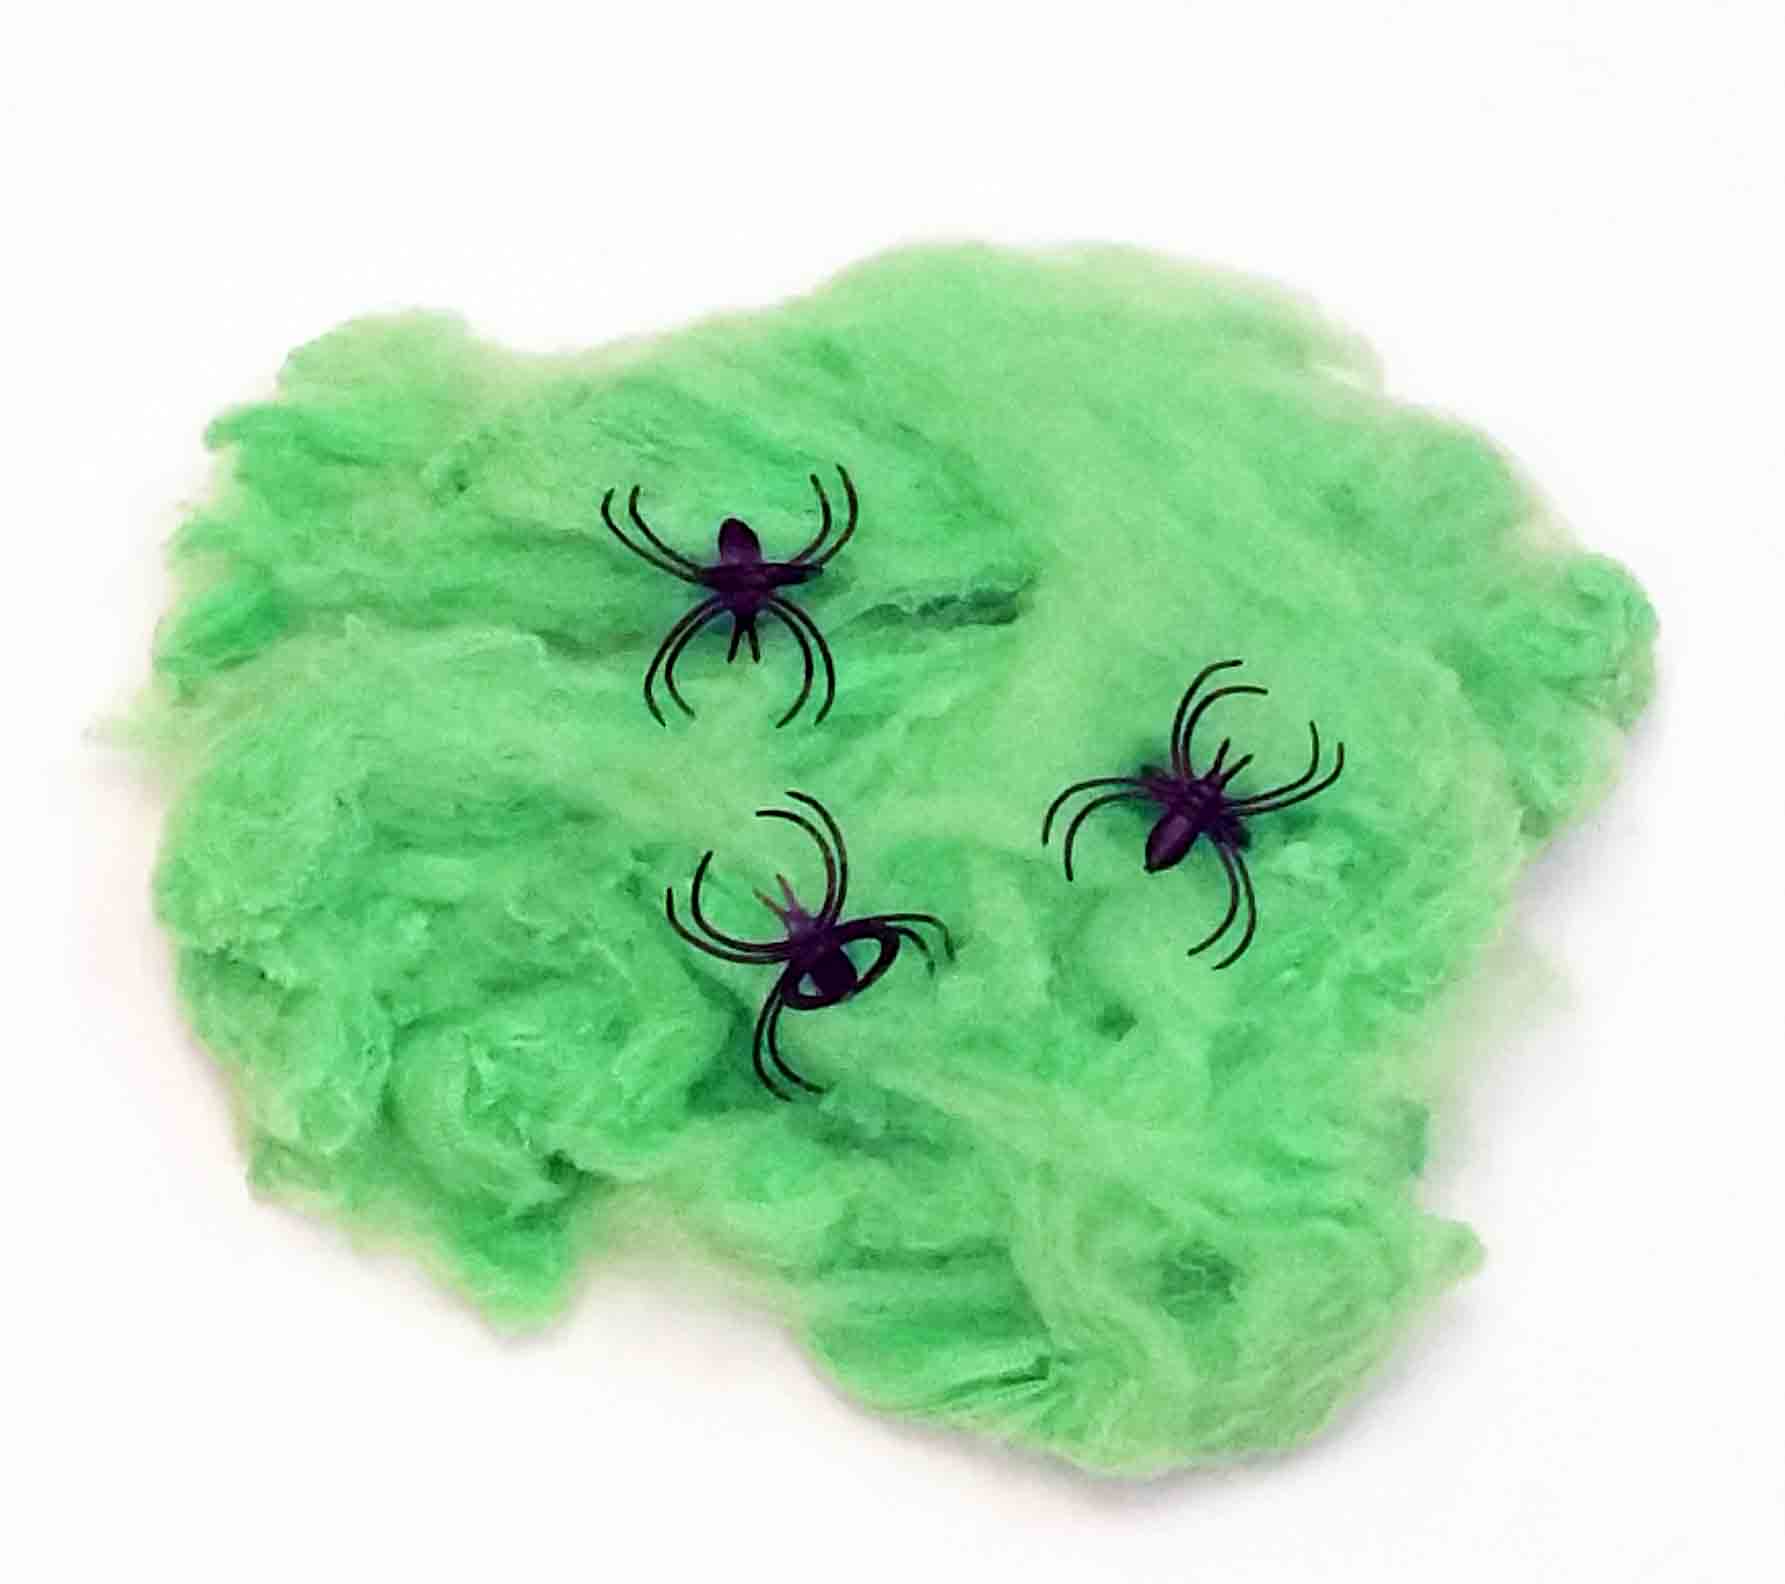 H349 - 1 oz Spider Web with 3 Spiders - 1.00 ea, .85/12